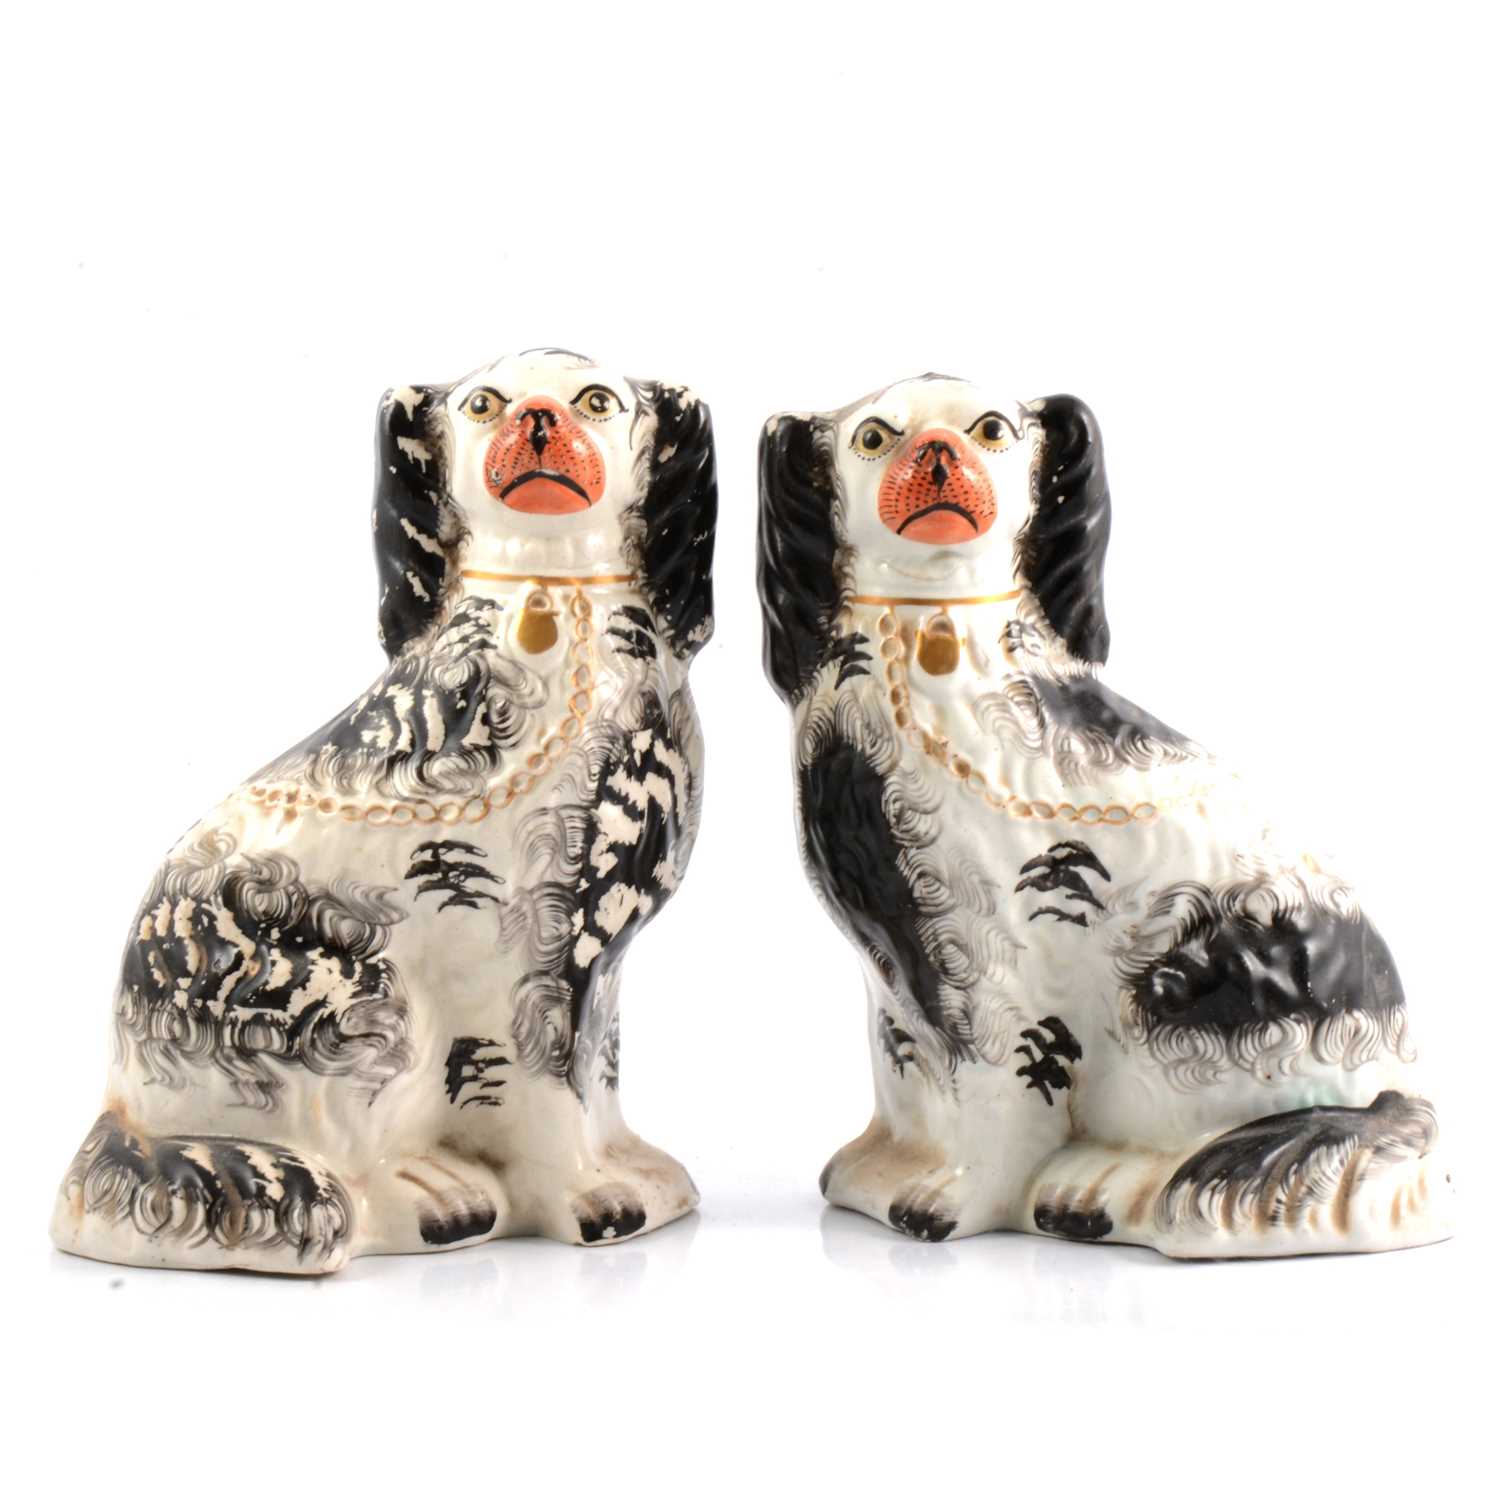 Lot 9 - Pair of Staffordshire models of King Charles Spaniels